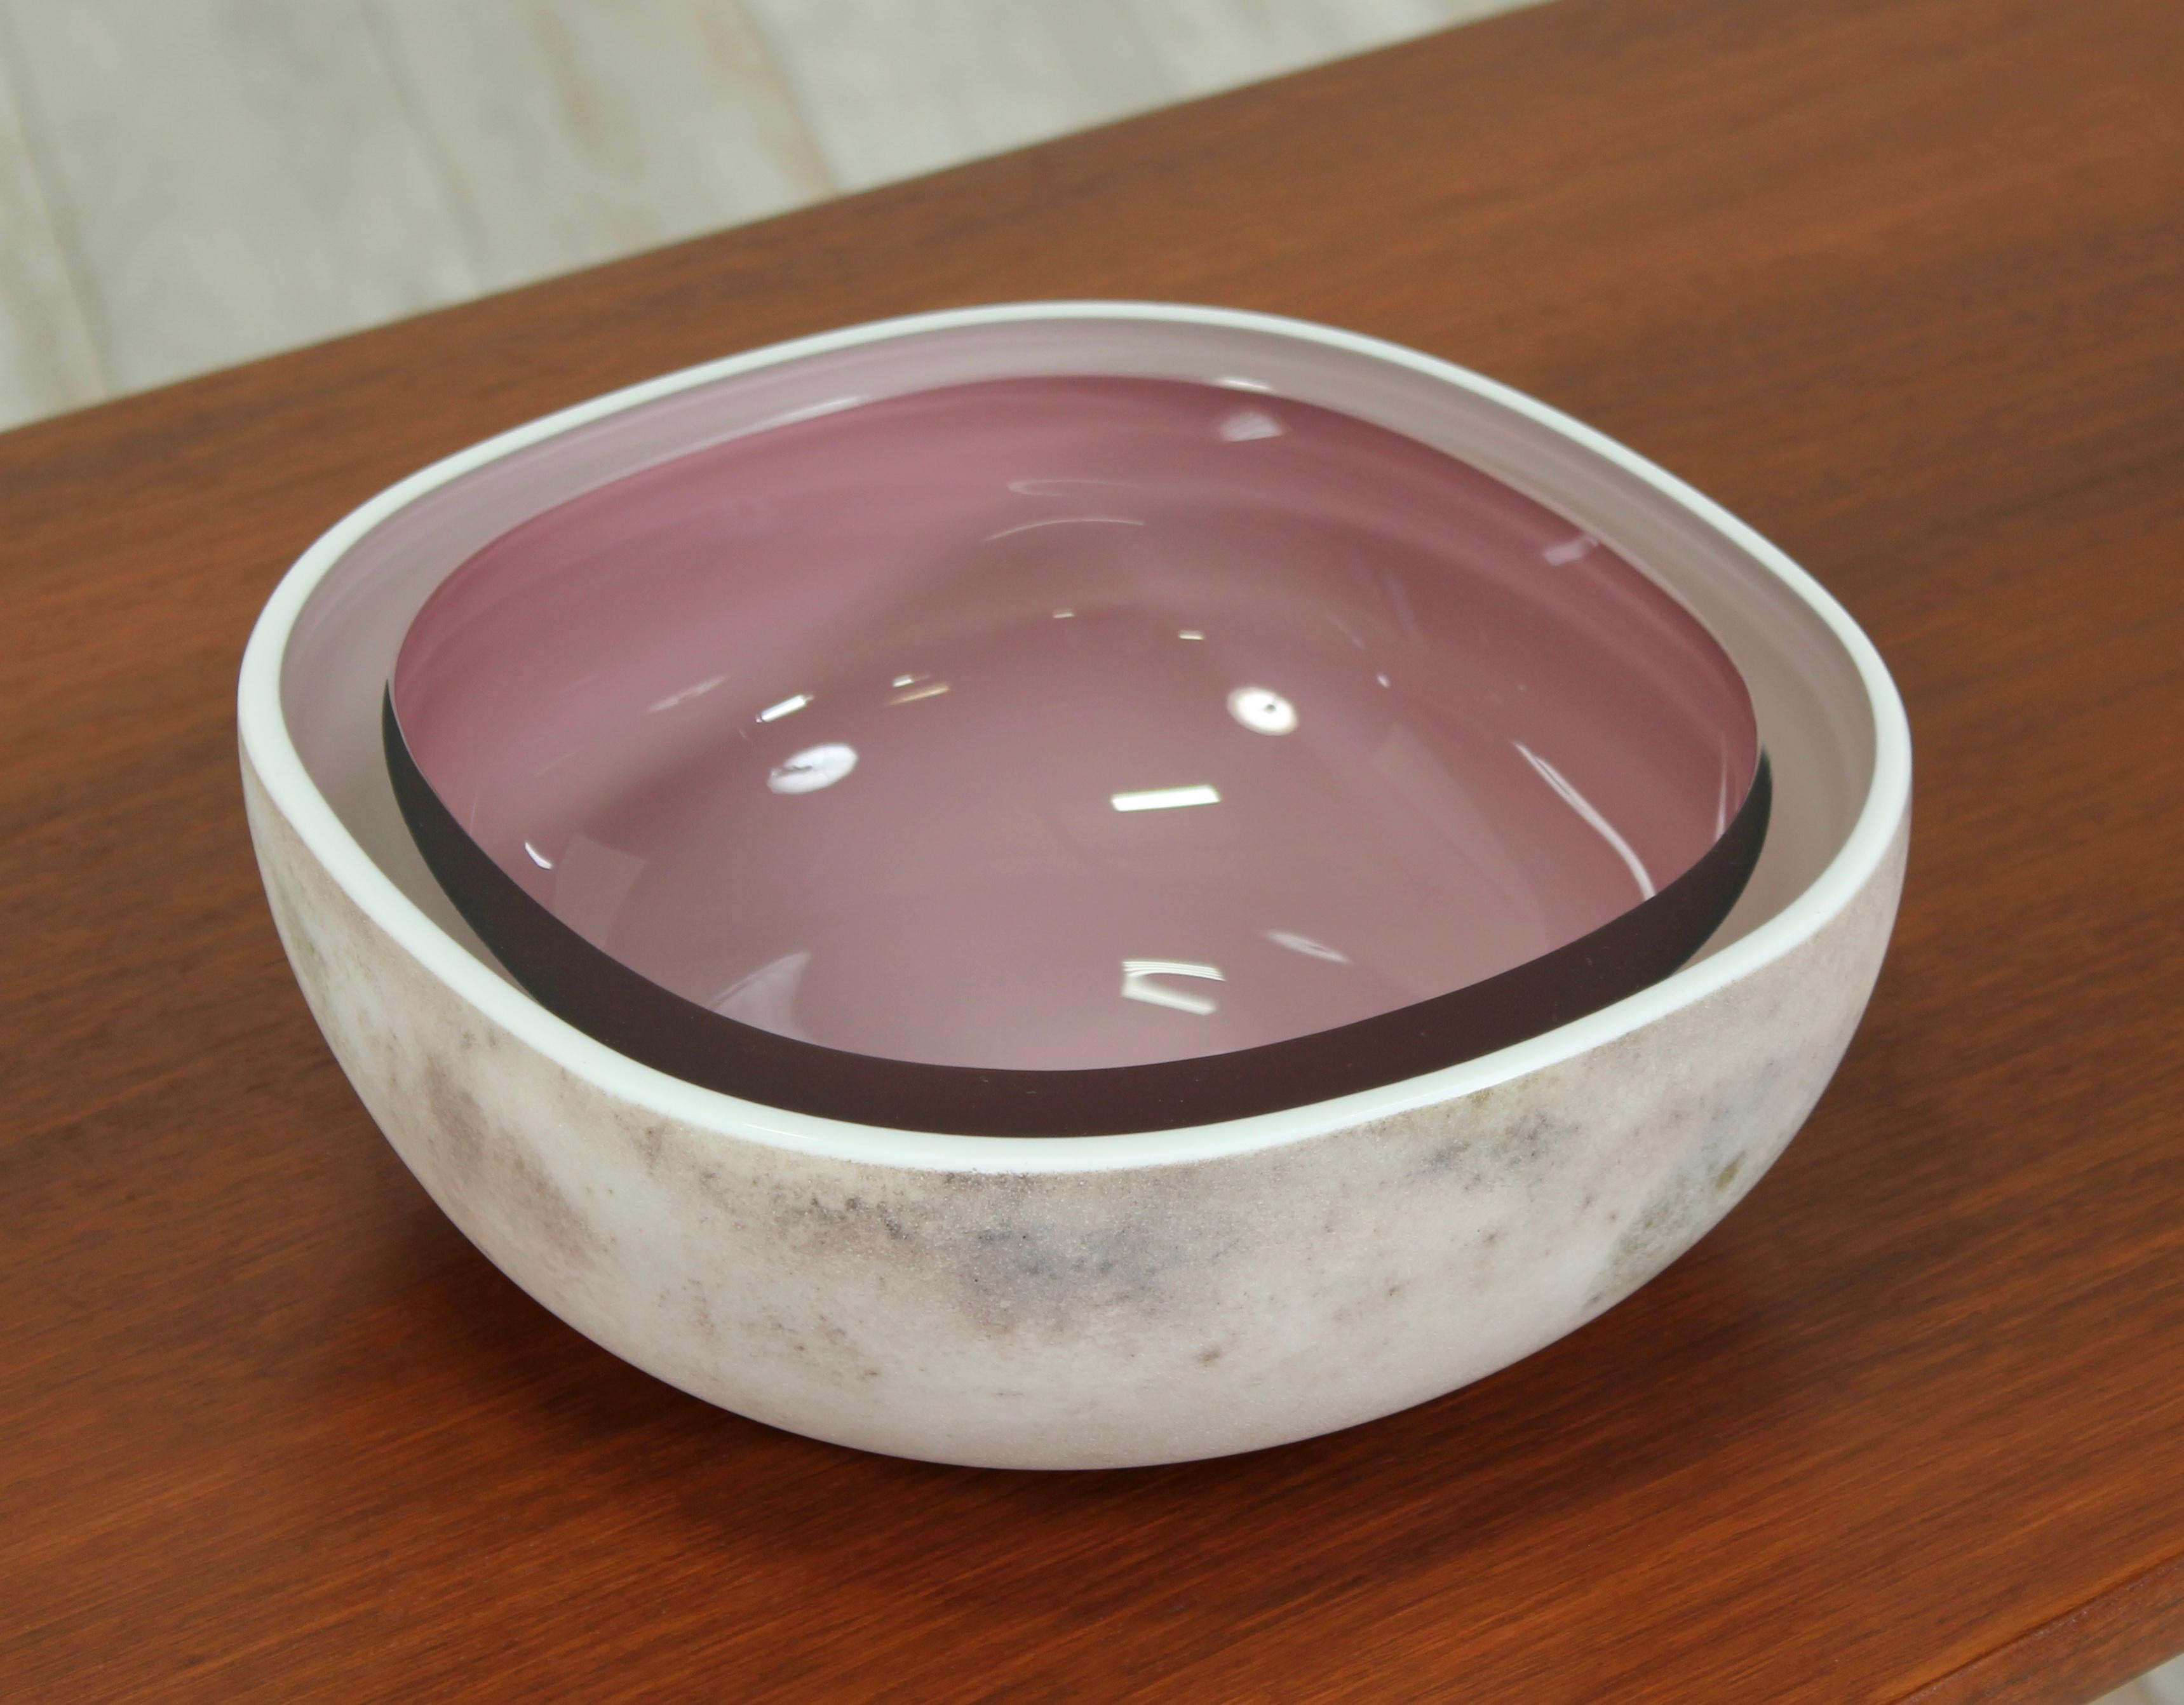      A beautiful 1960s Alfredo Barbini for Oggetti “Scavo” art glass centrepiece bowl. This piece features a textured grayish-white lava-like exterior with a polished amethyst glass interior, much like a split geode.
Etched signature: Barbini,